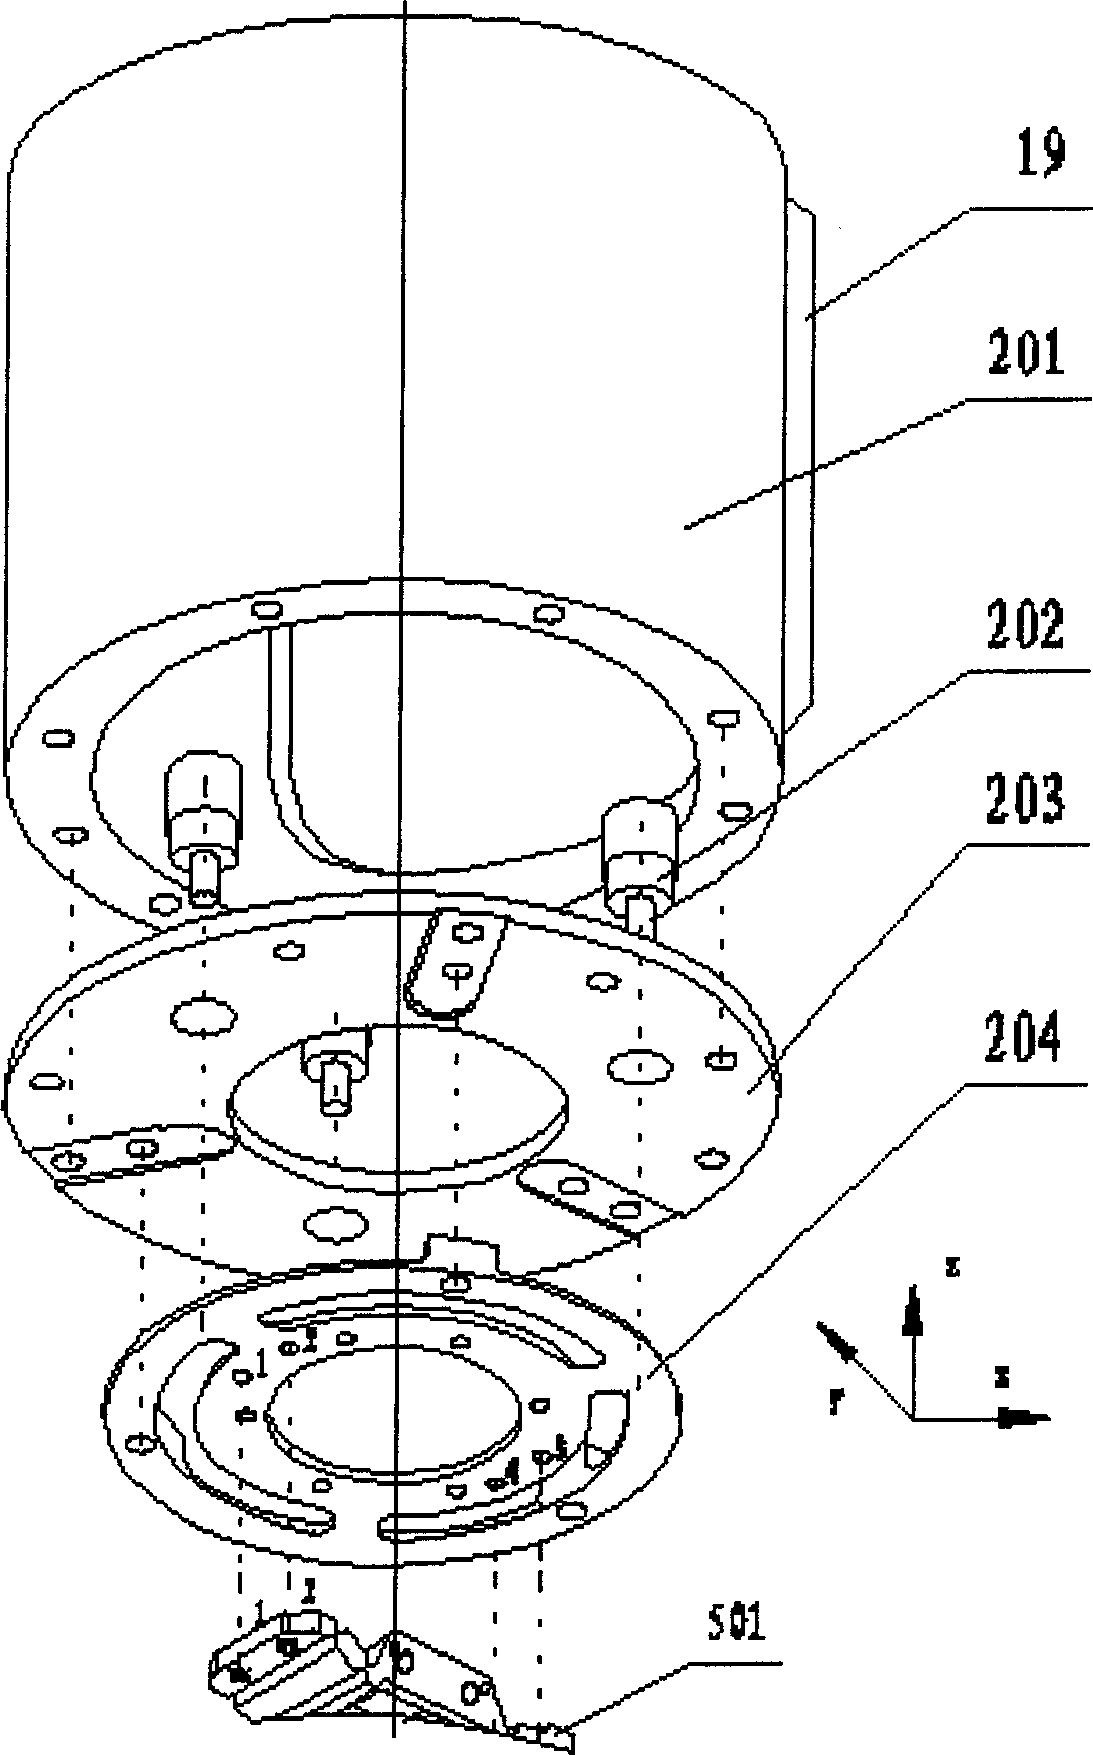 Stepped and repeated illuminating and nano-imprinting device